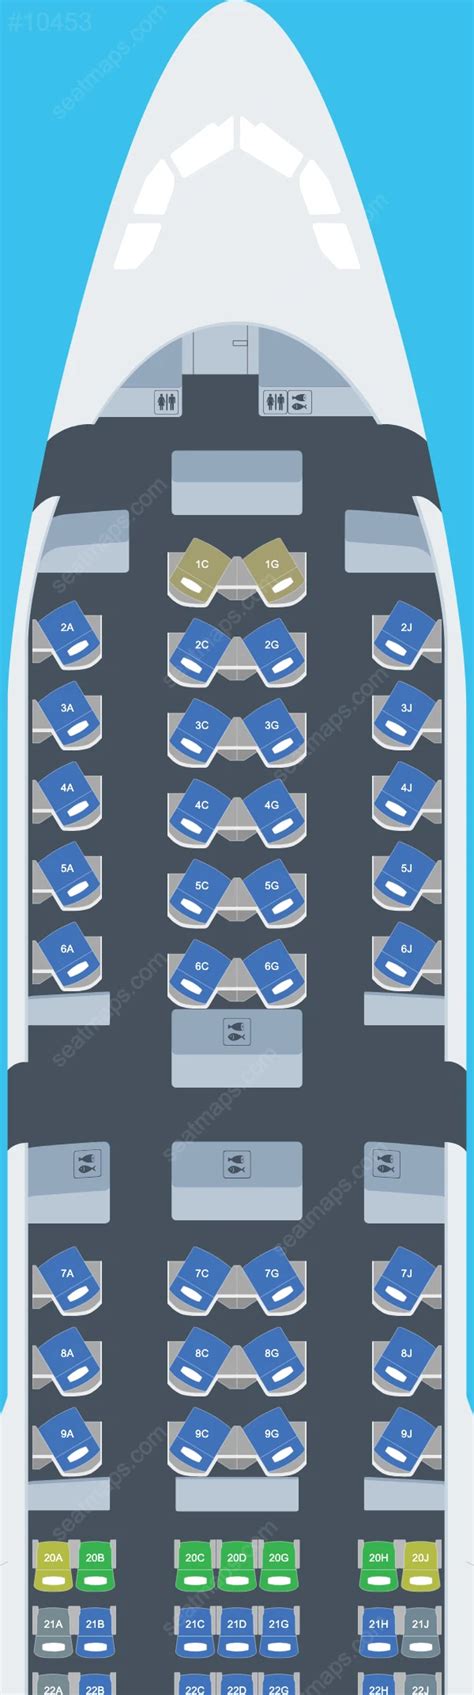 heston airlines  seat map